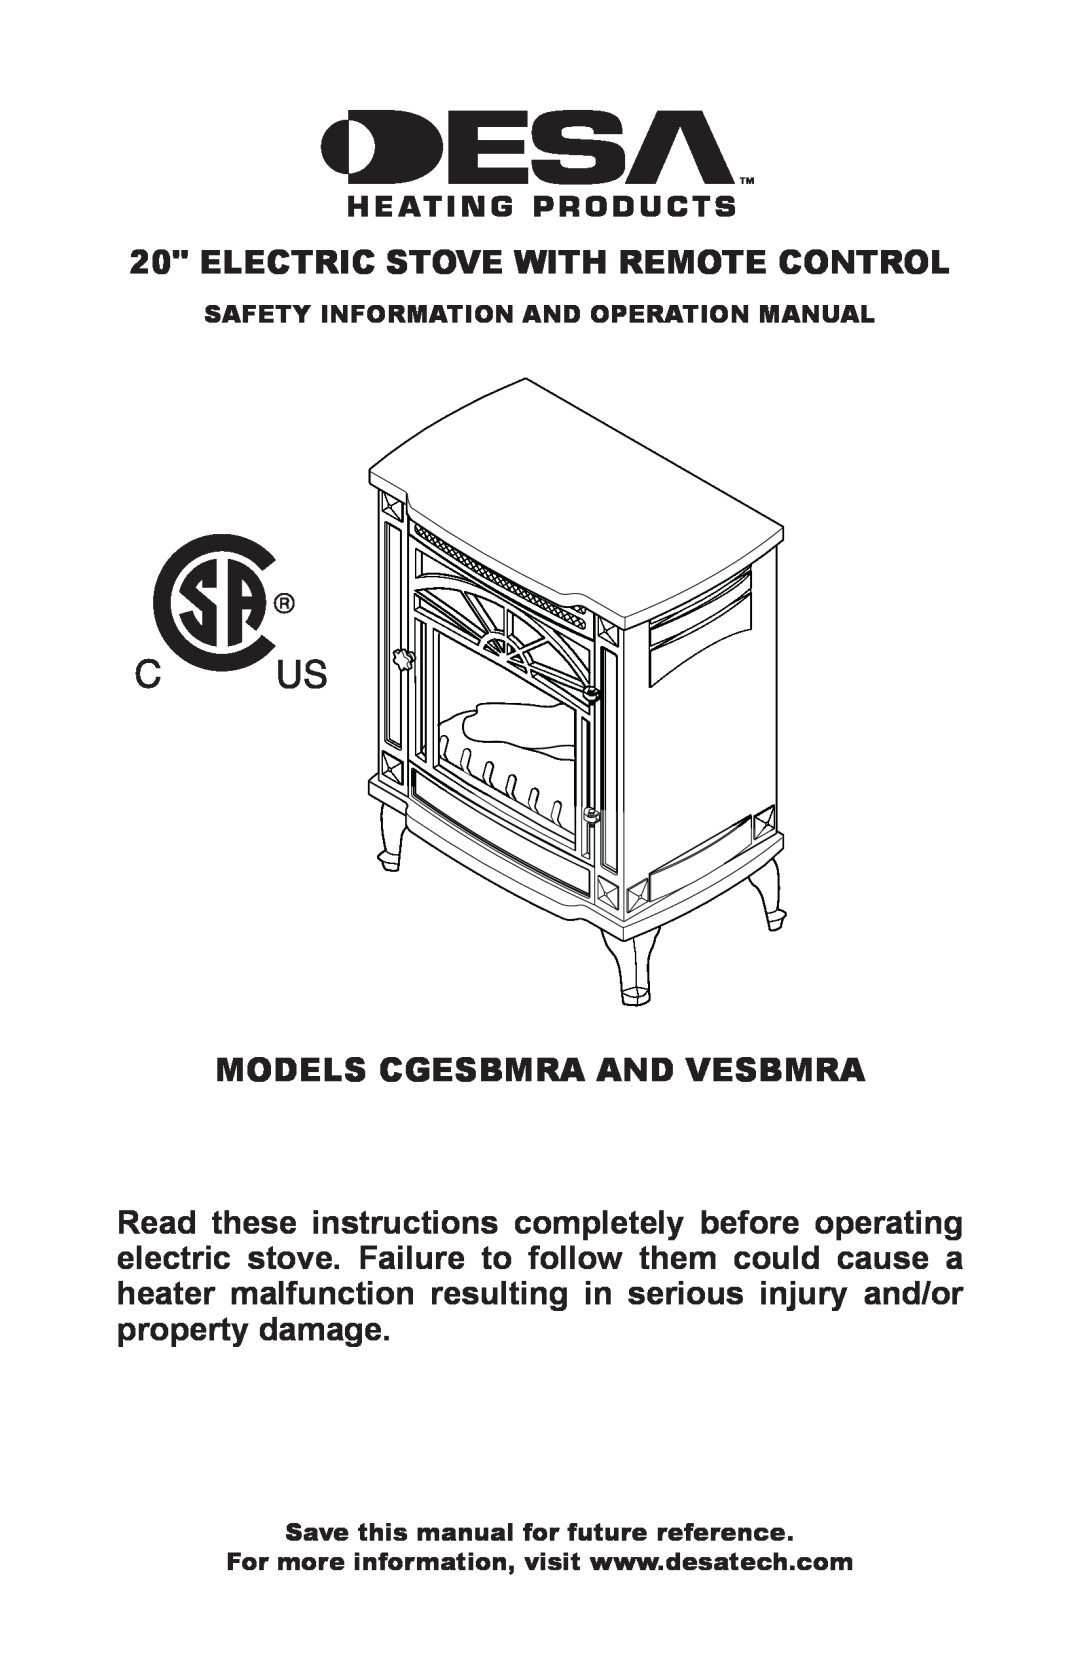 Desa operation manual Electric Stove With Remote Control, Models CGESBMRA AND VESBMRA 